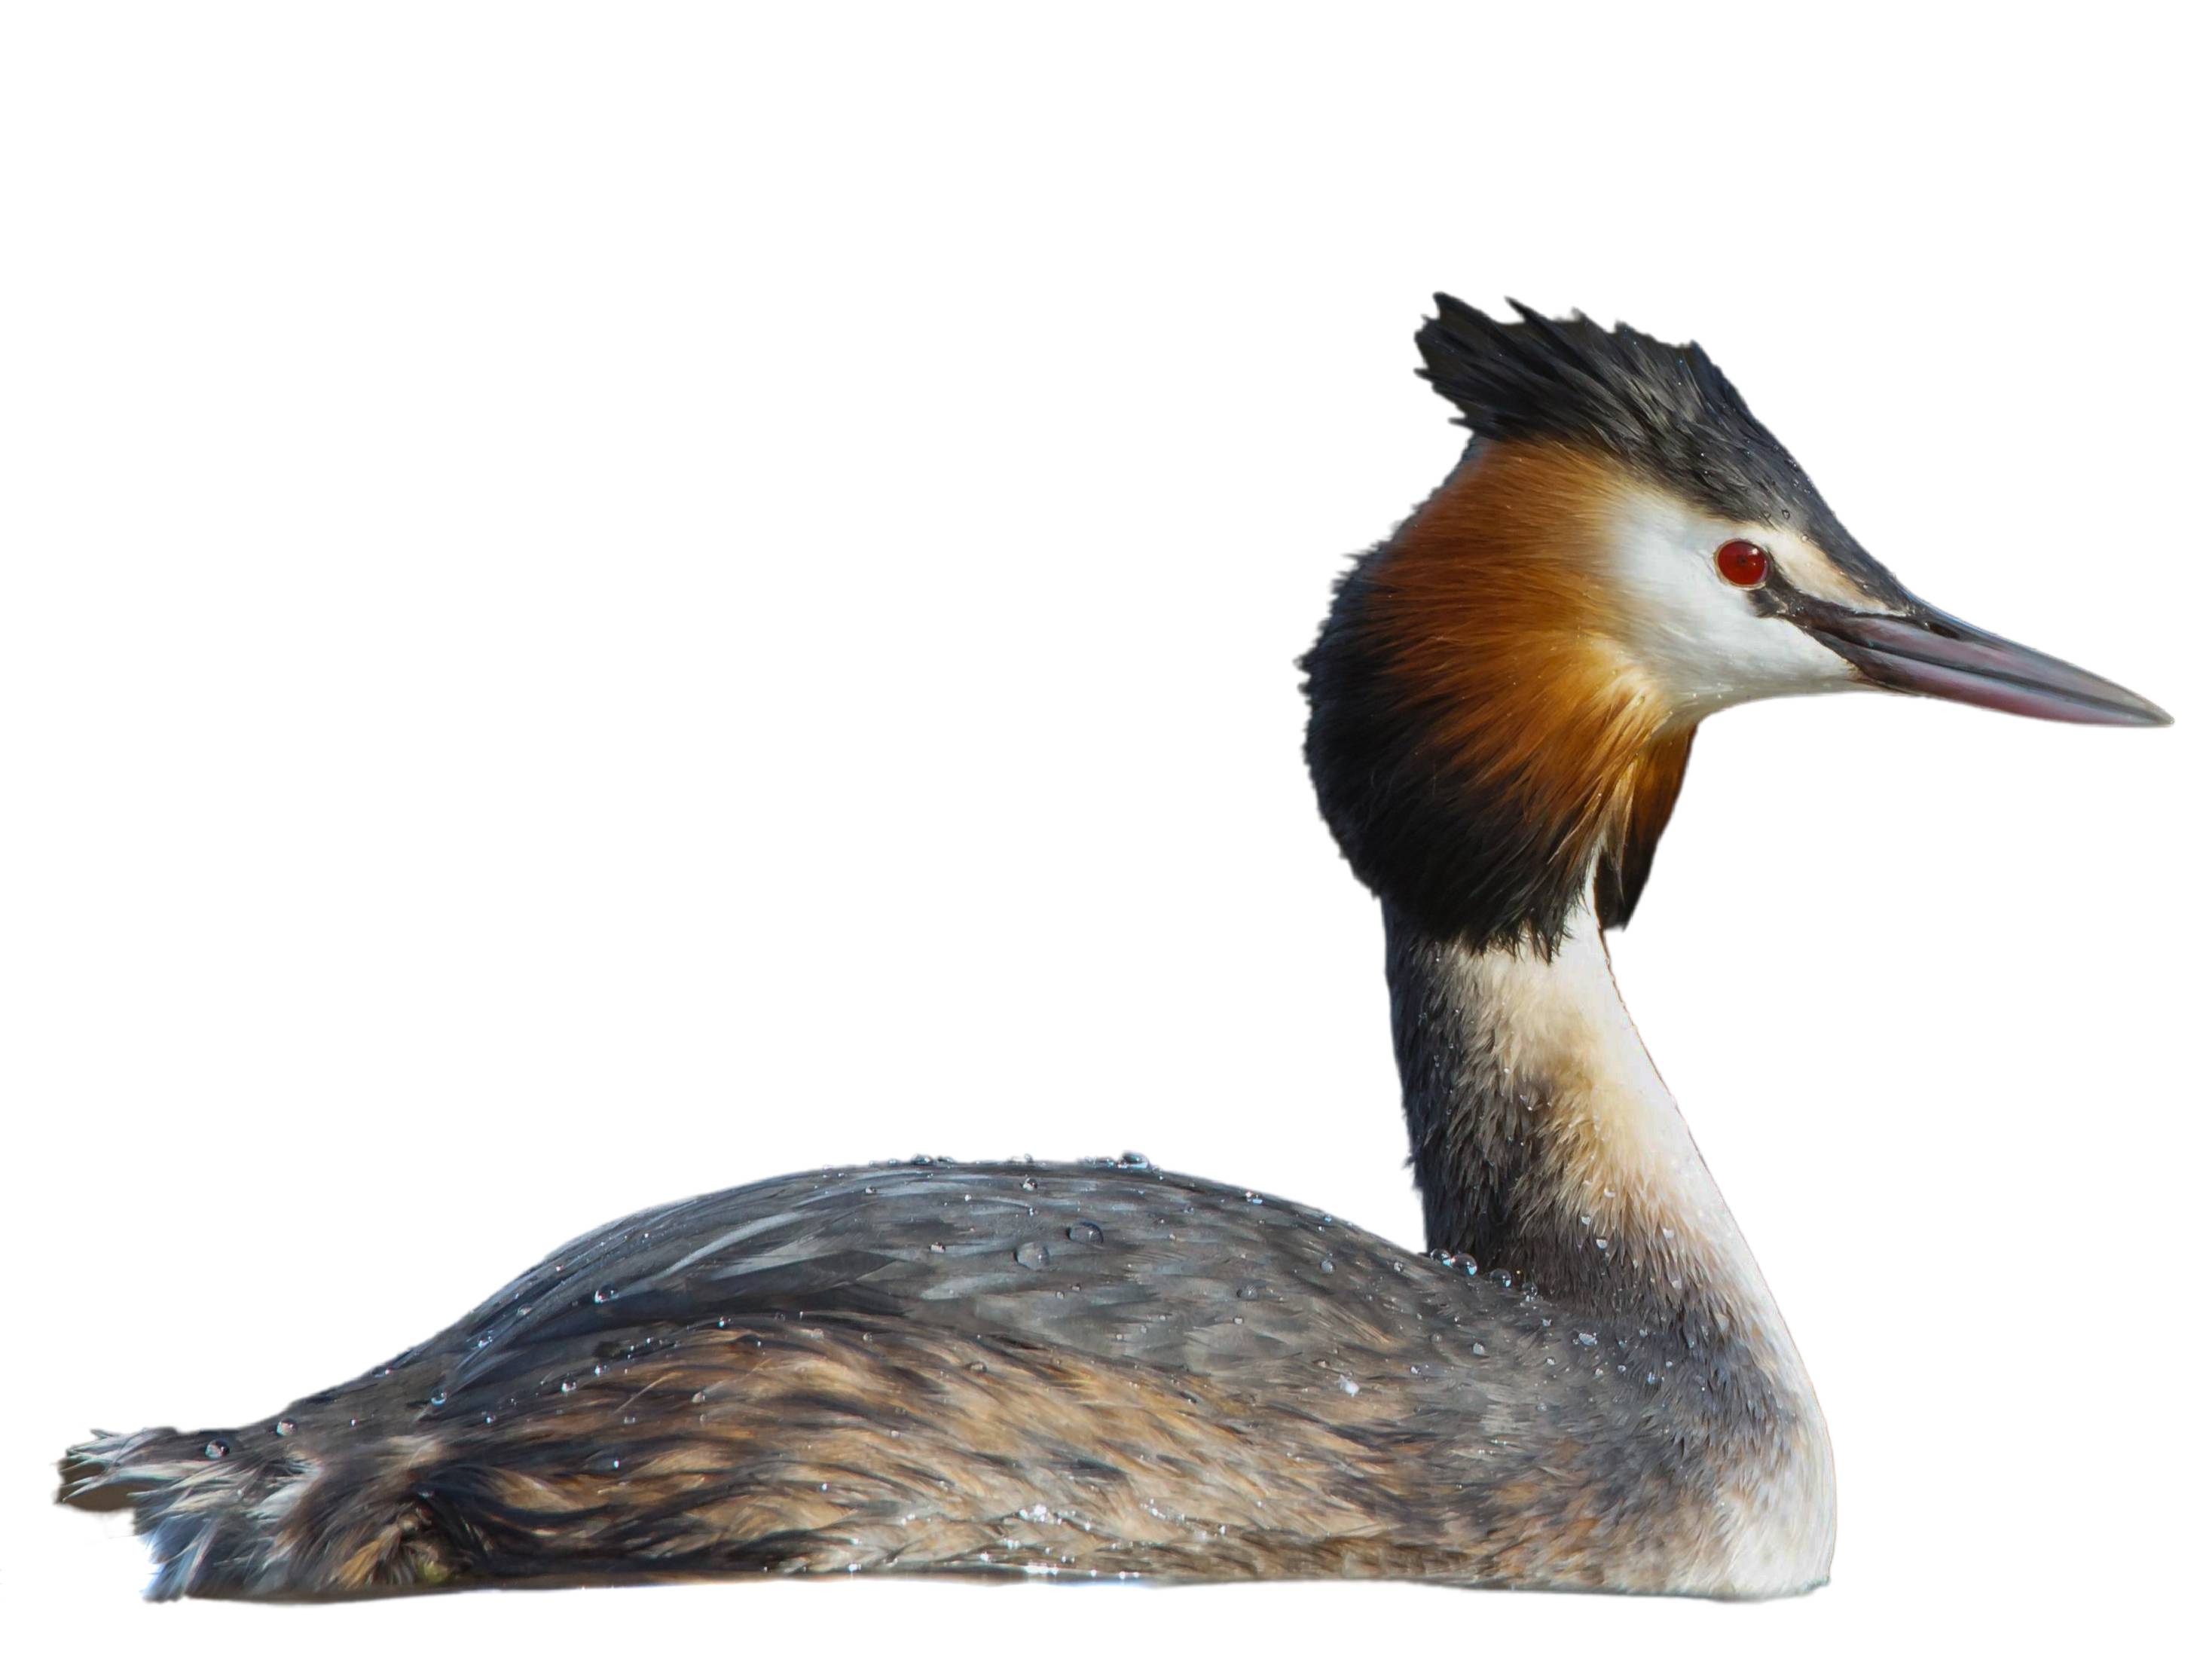 A photo of a Great Crested Grebe (Podiceps cristatus)